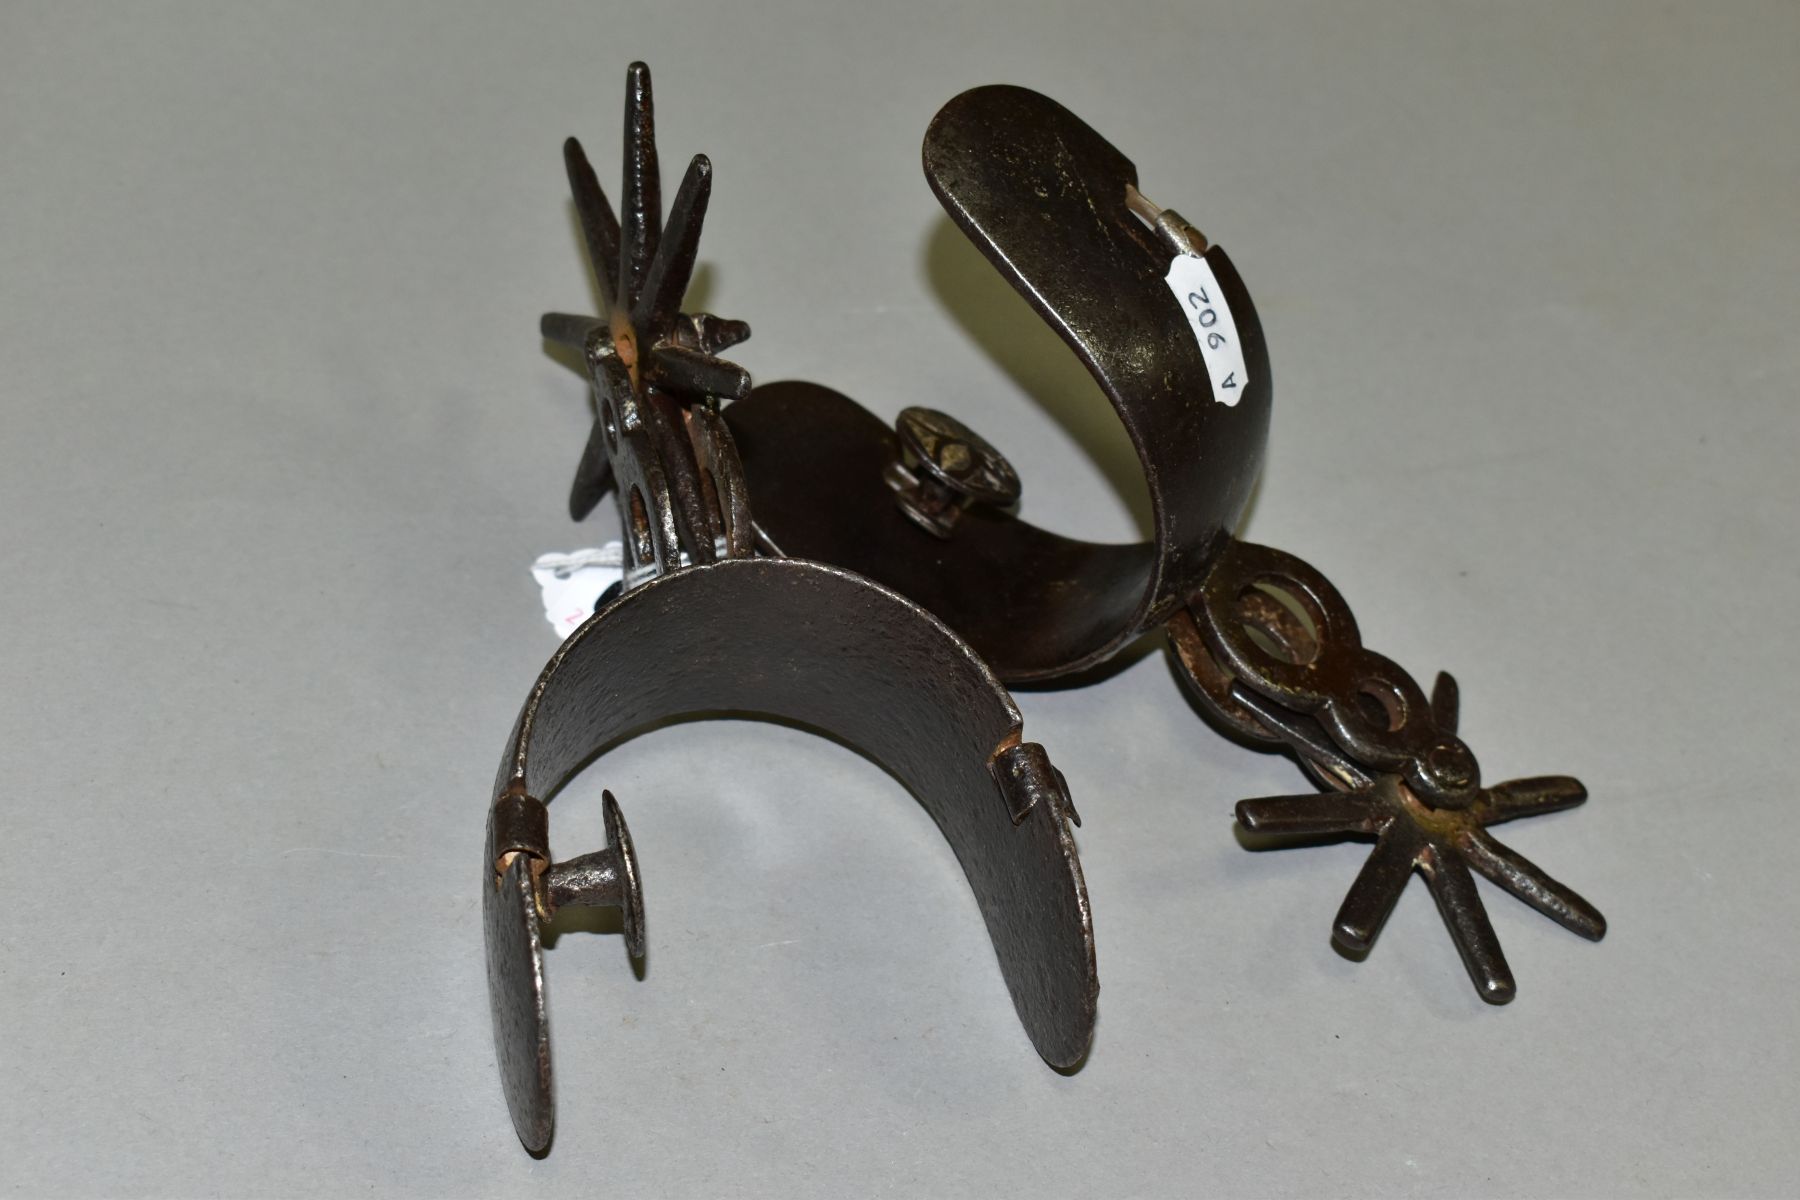 A PAIR OF SOUTH AMERICAN SILVER OVERLAID GAUCHO SPURS (2) - Image 6 of 6